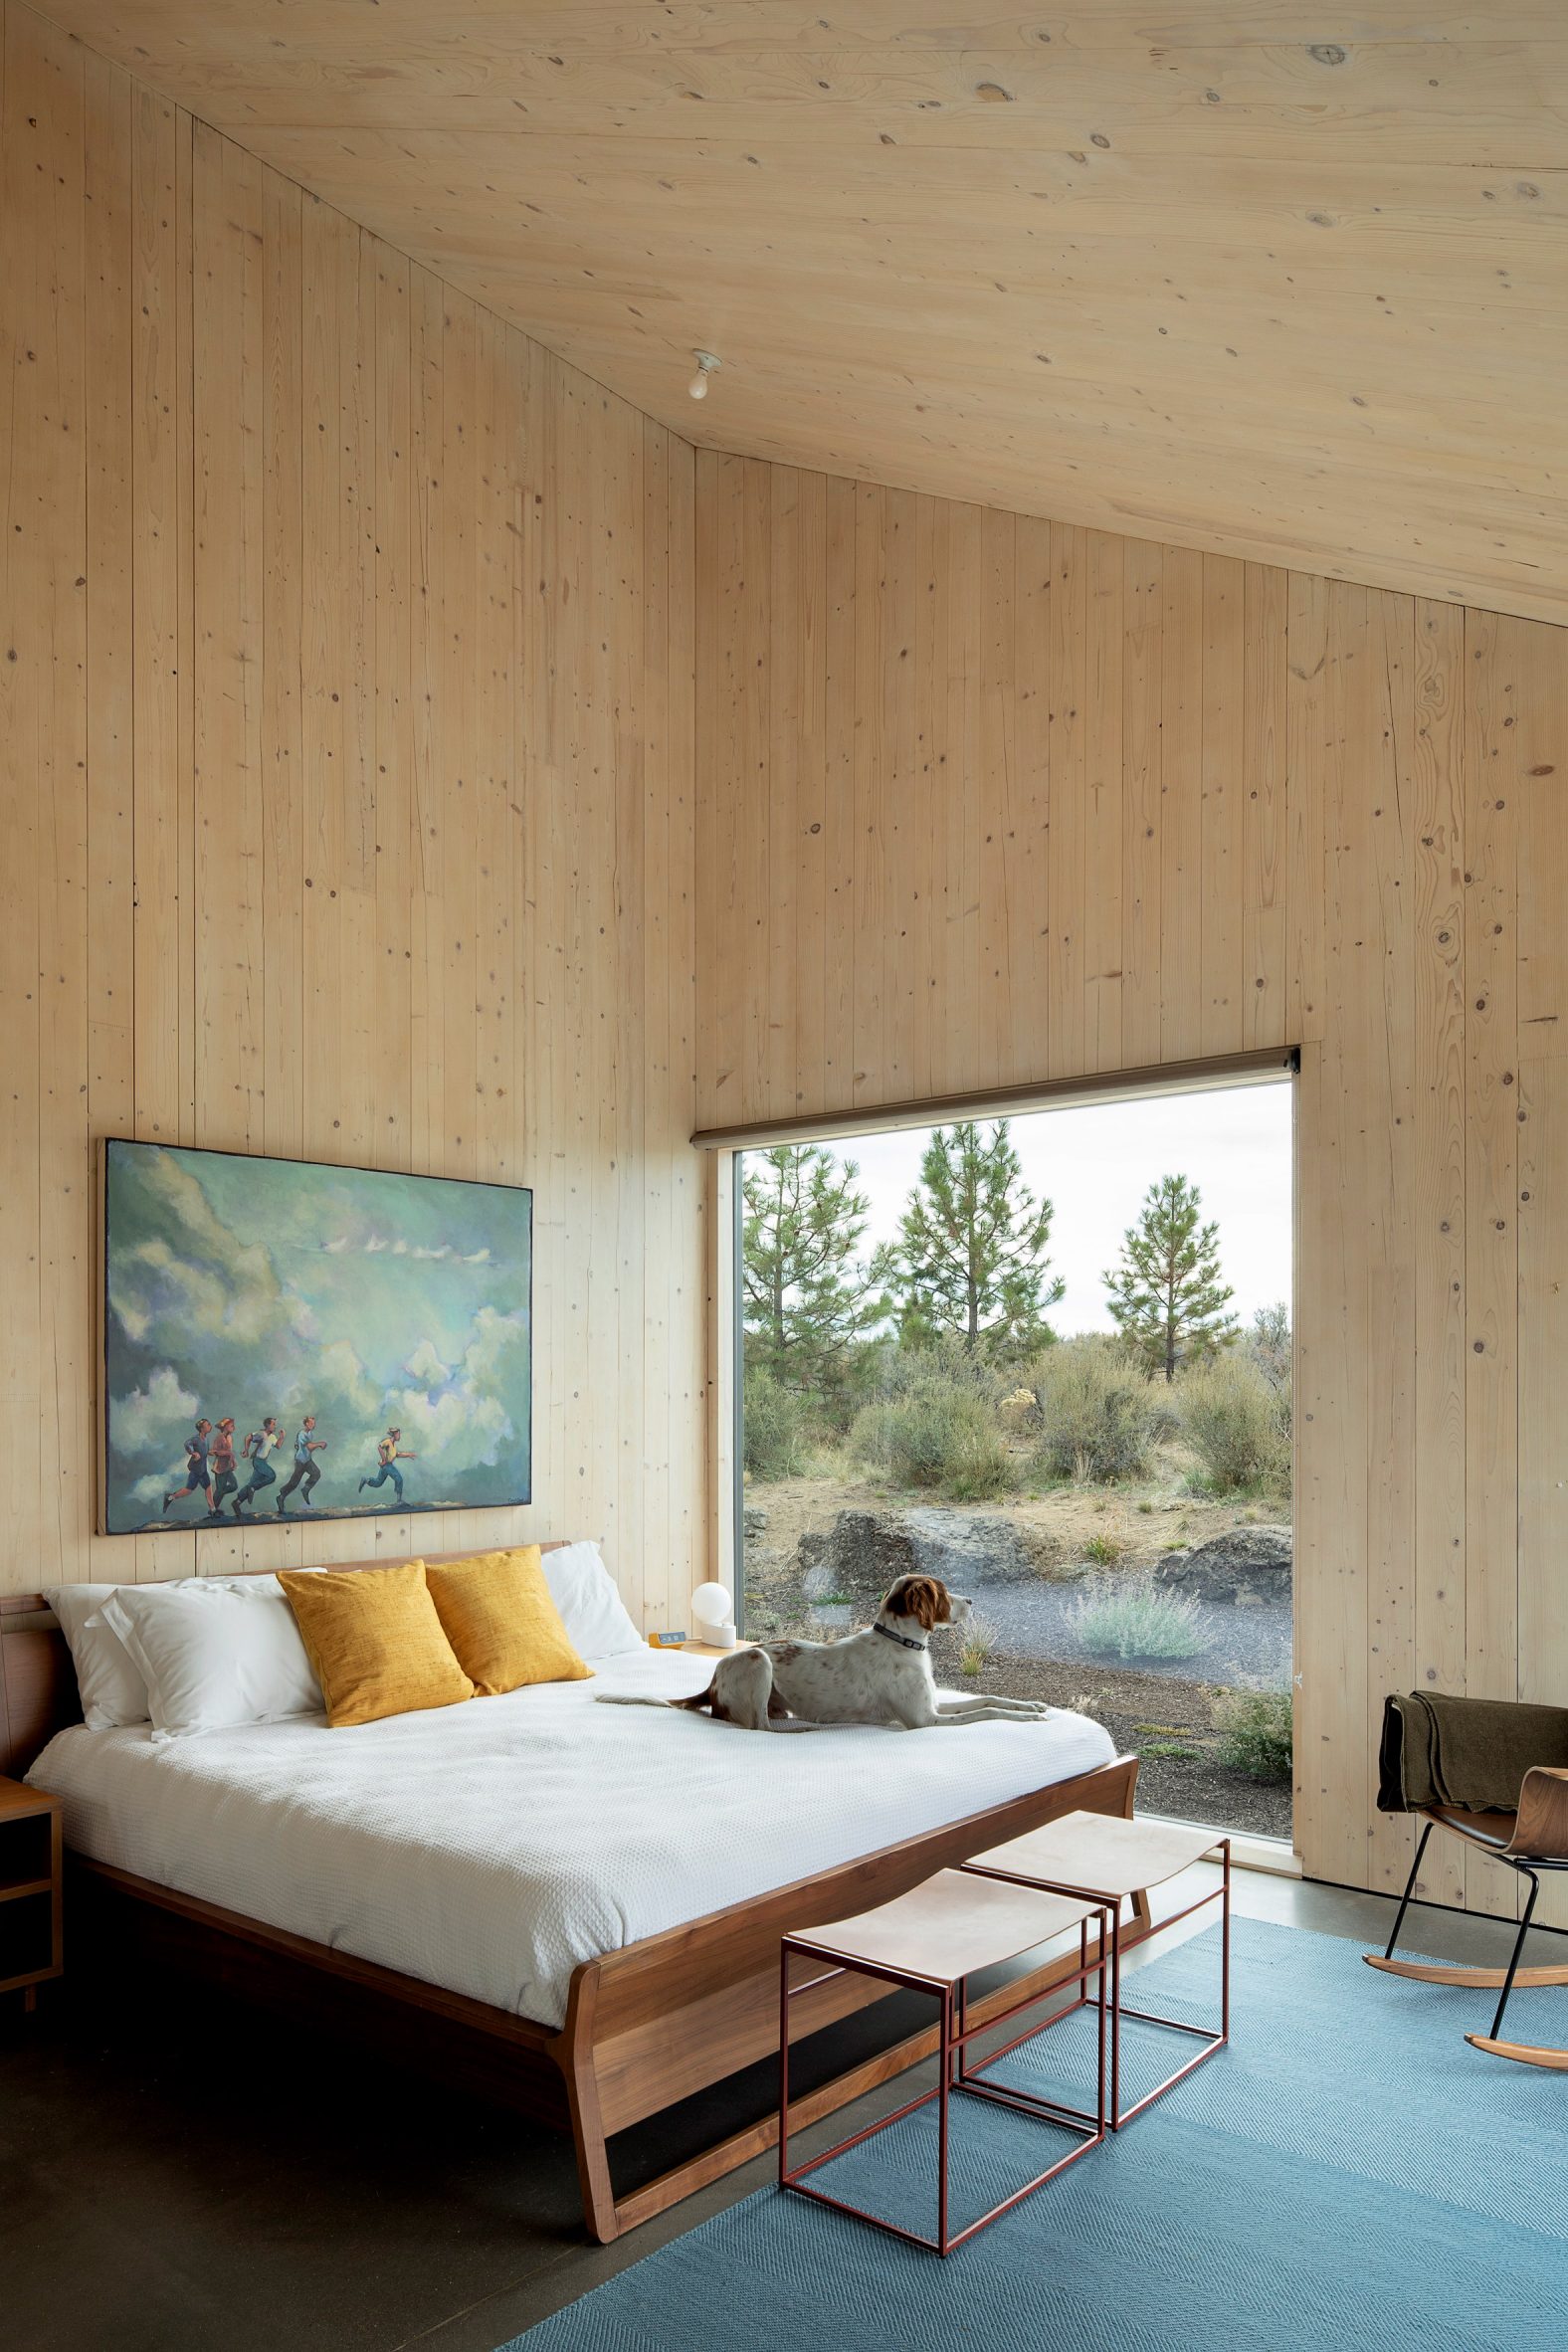 Bedroom at Octothorpe House by Mork-Ulnes